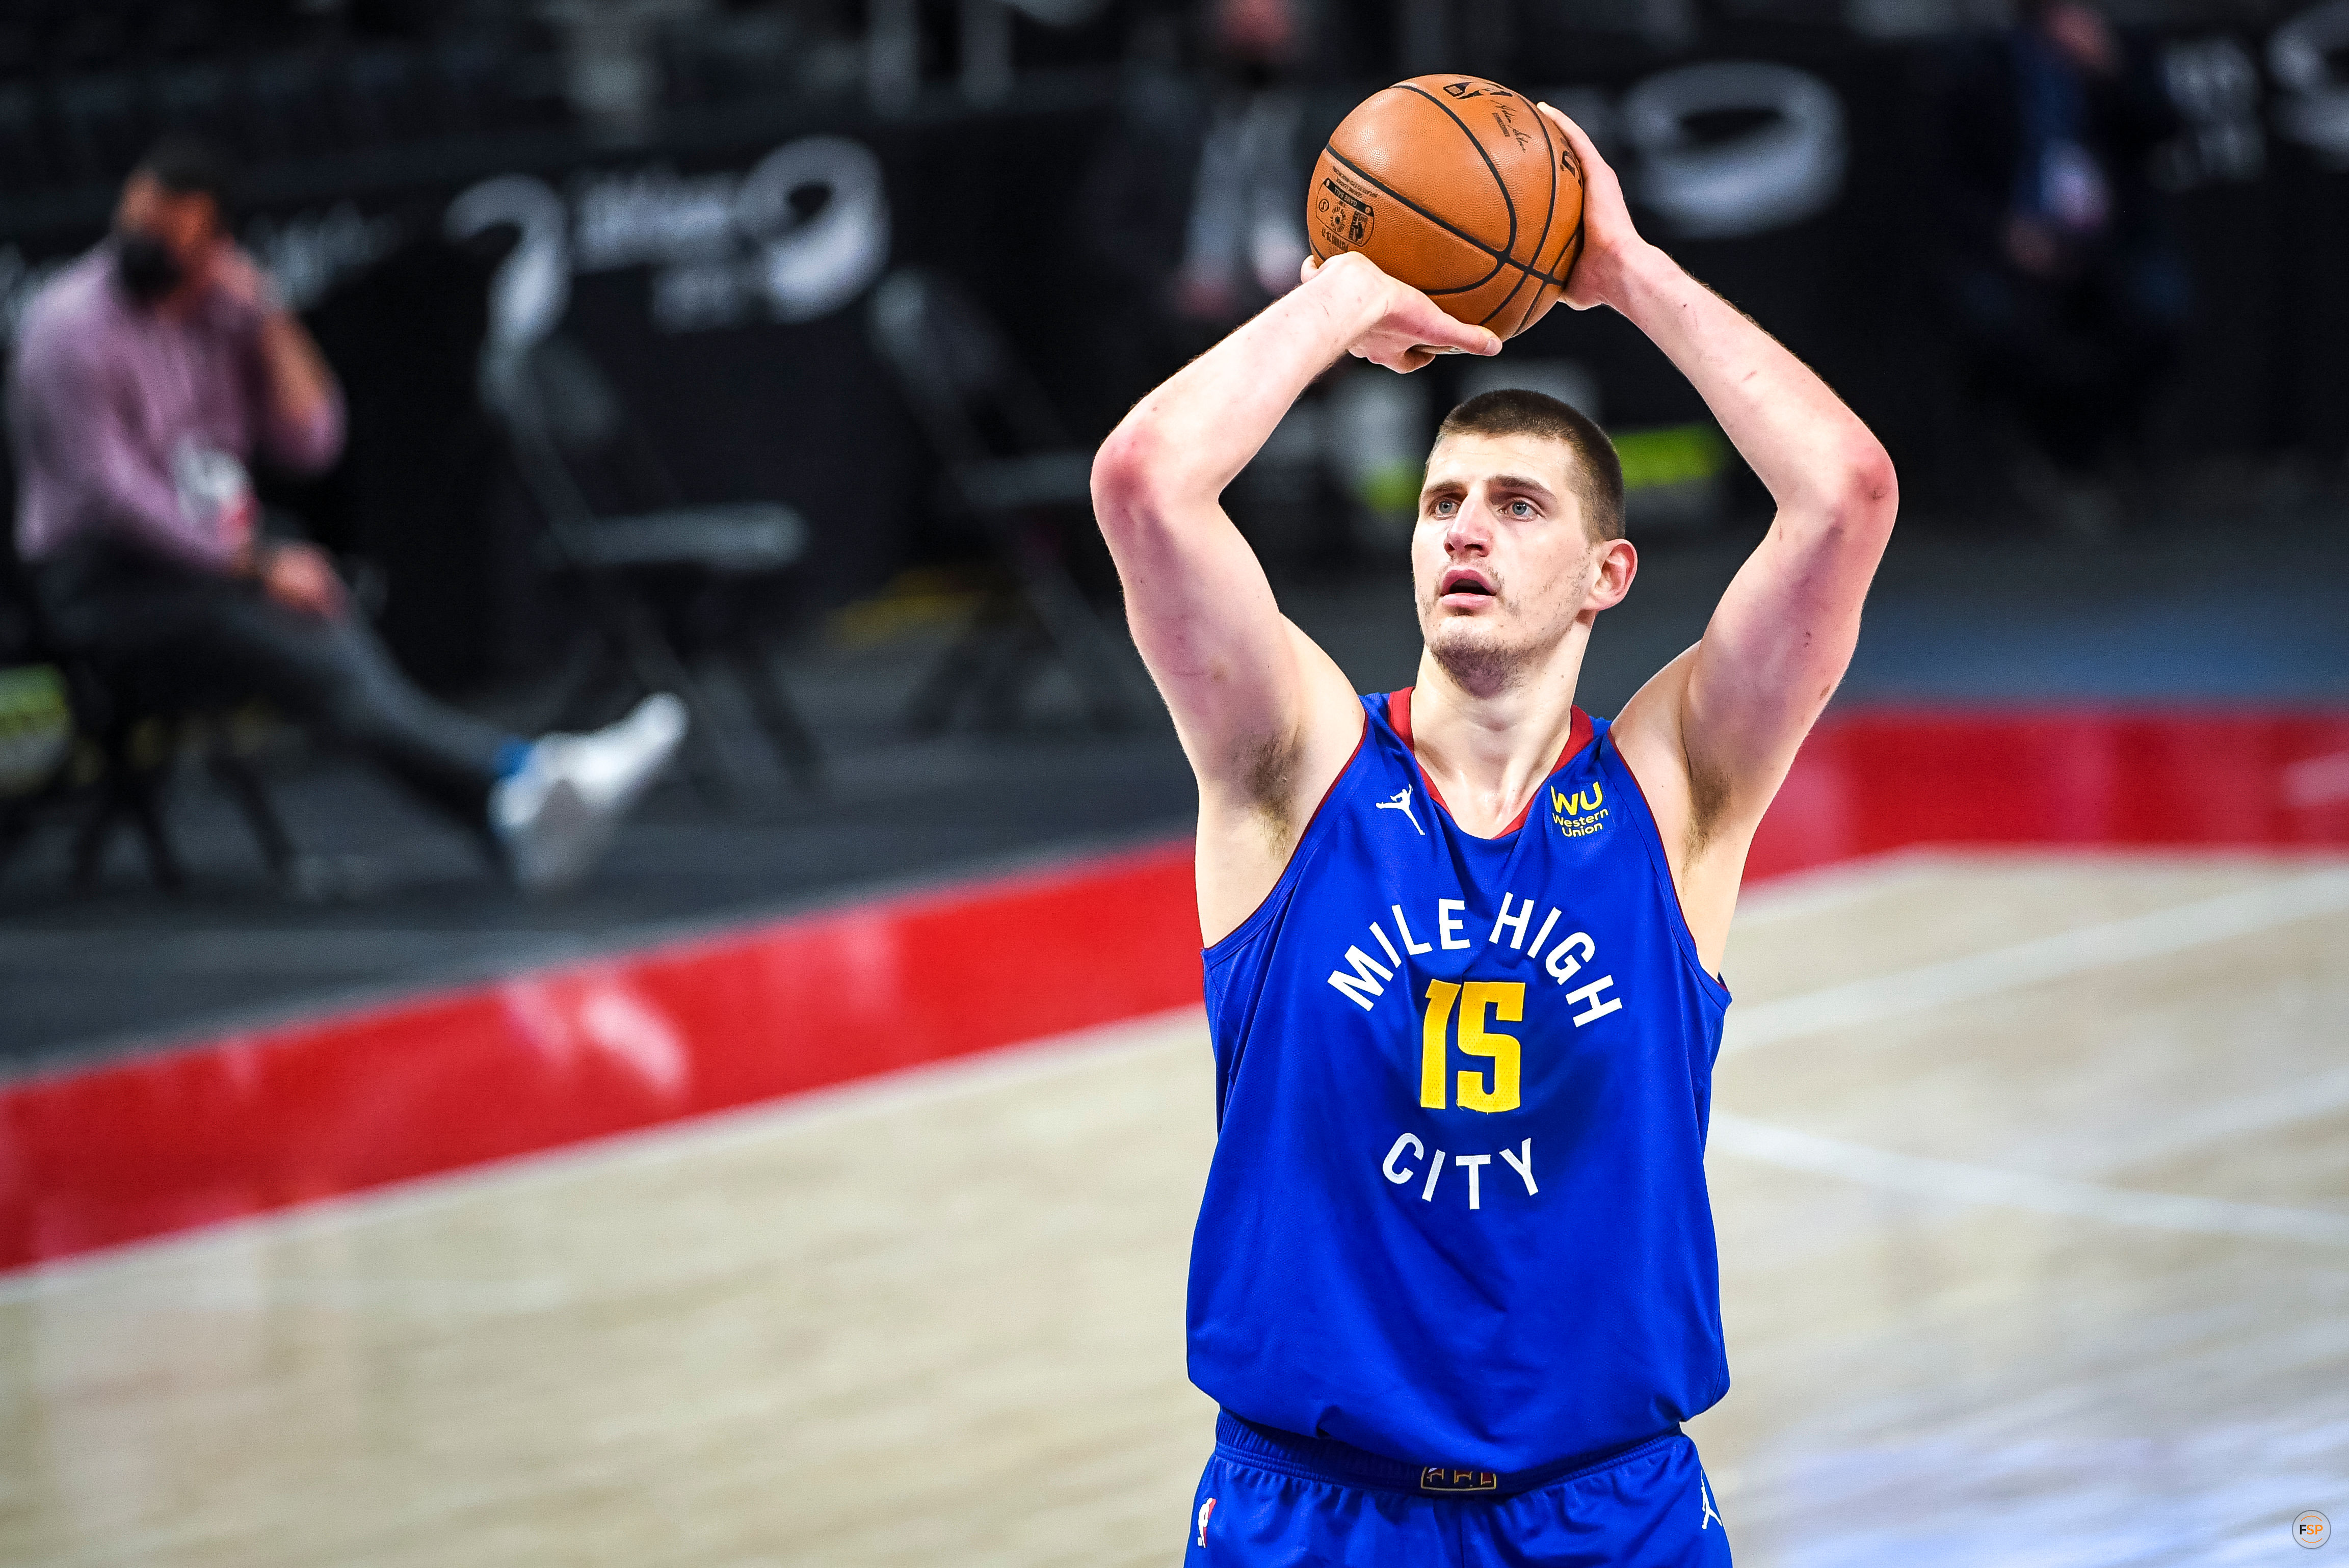 DETROIT, MICHIGAN - MAY 14: Nikola Jokic #15 of the Denver Nuggets shoots a free throw against the Detroit Pistons during the first quarter of the NBA game at Little Caesars Arena on May 14, 2021 in Detroit, Michigan. NOTE TO USER: User expressly acknowledges and agrees that, by downloading and or using this photograph, User is consenting to the terms and conditions of the Getty Images License Agreement. (Photo by Nic Antaya/Getty Images)